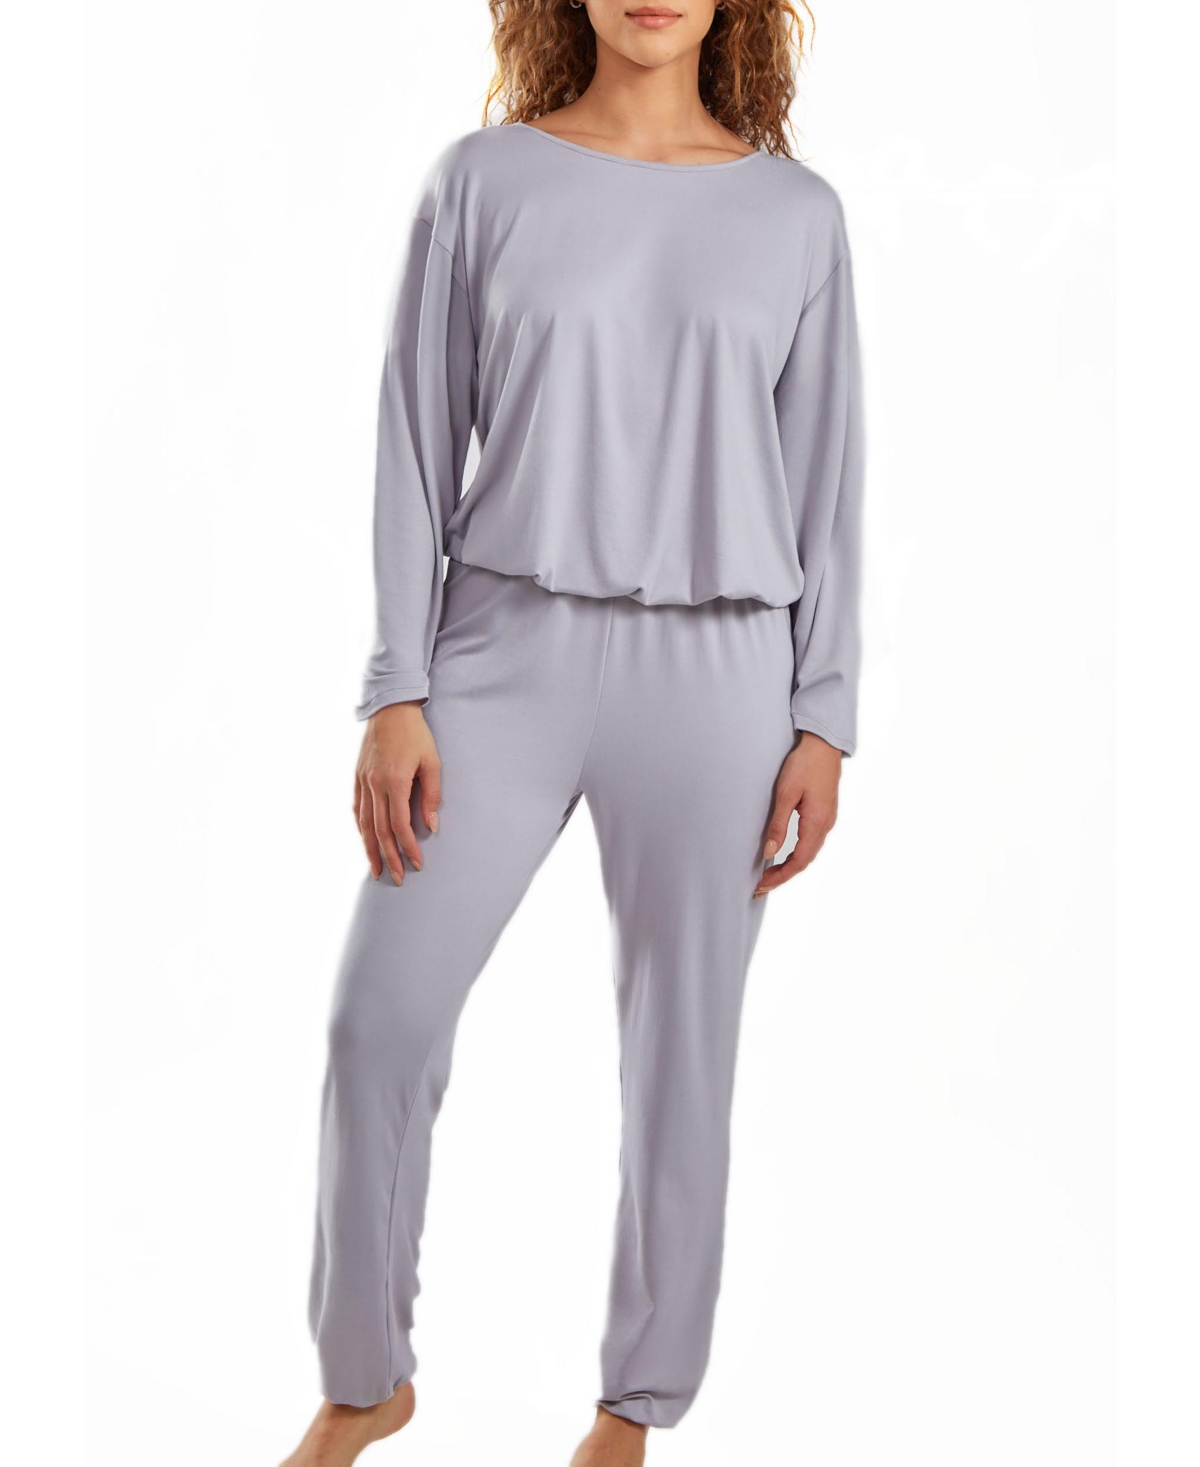 Icollection Women's Jewel Modal Jogger Pajama Sleep Pant Set In Ultra Soft Cozy Style, 2 Piece In Light Gray